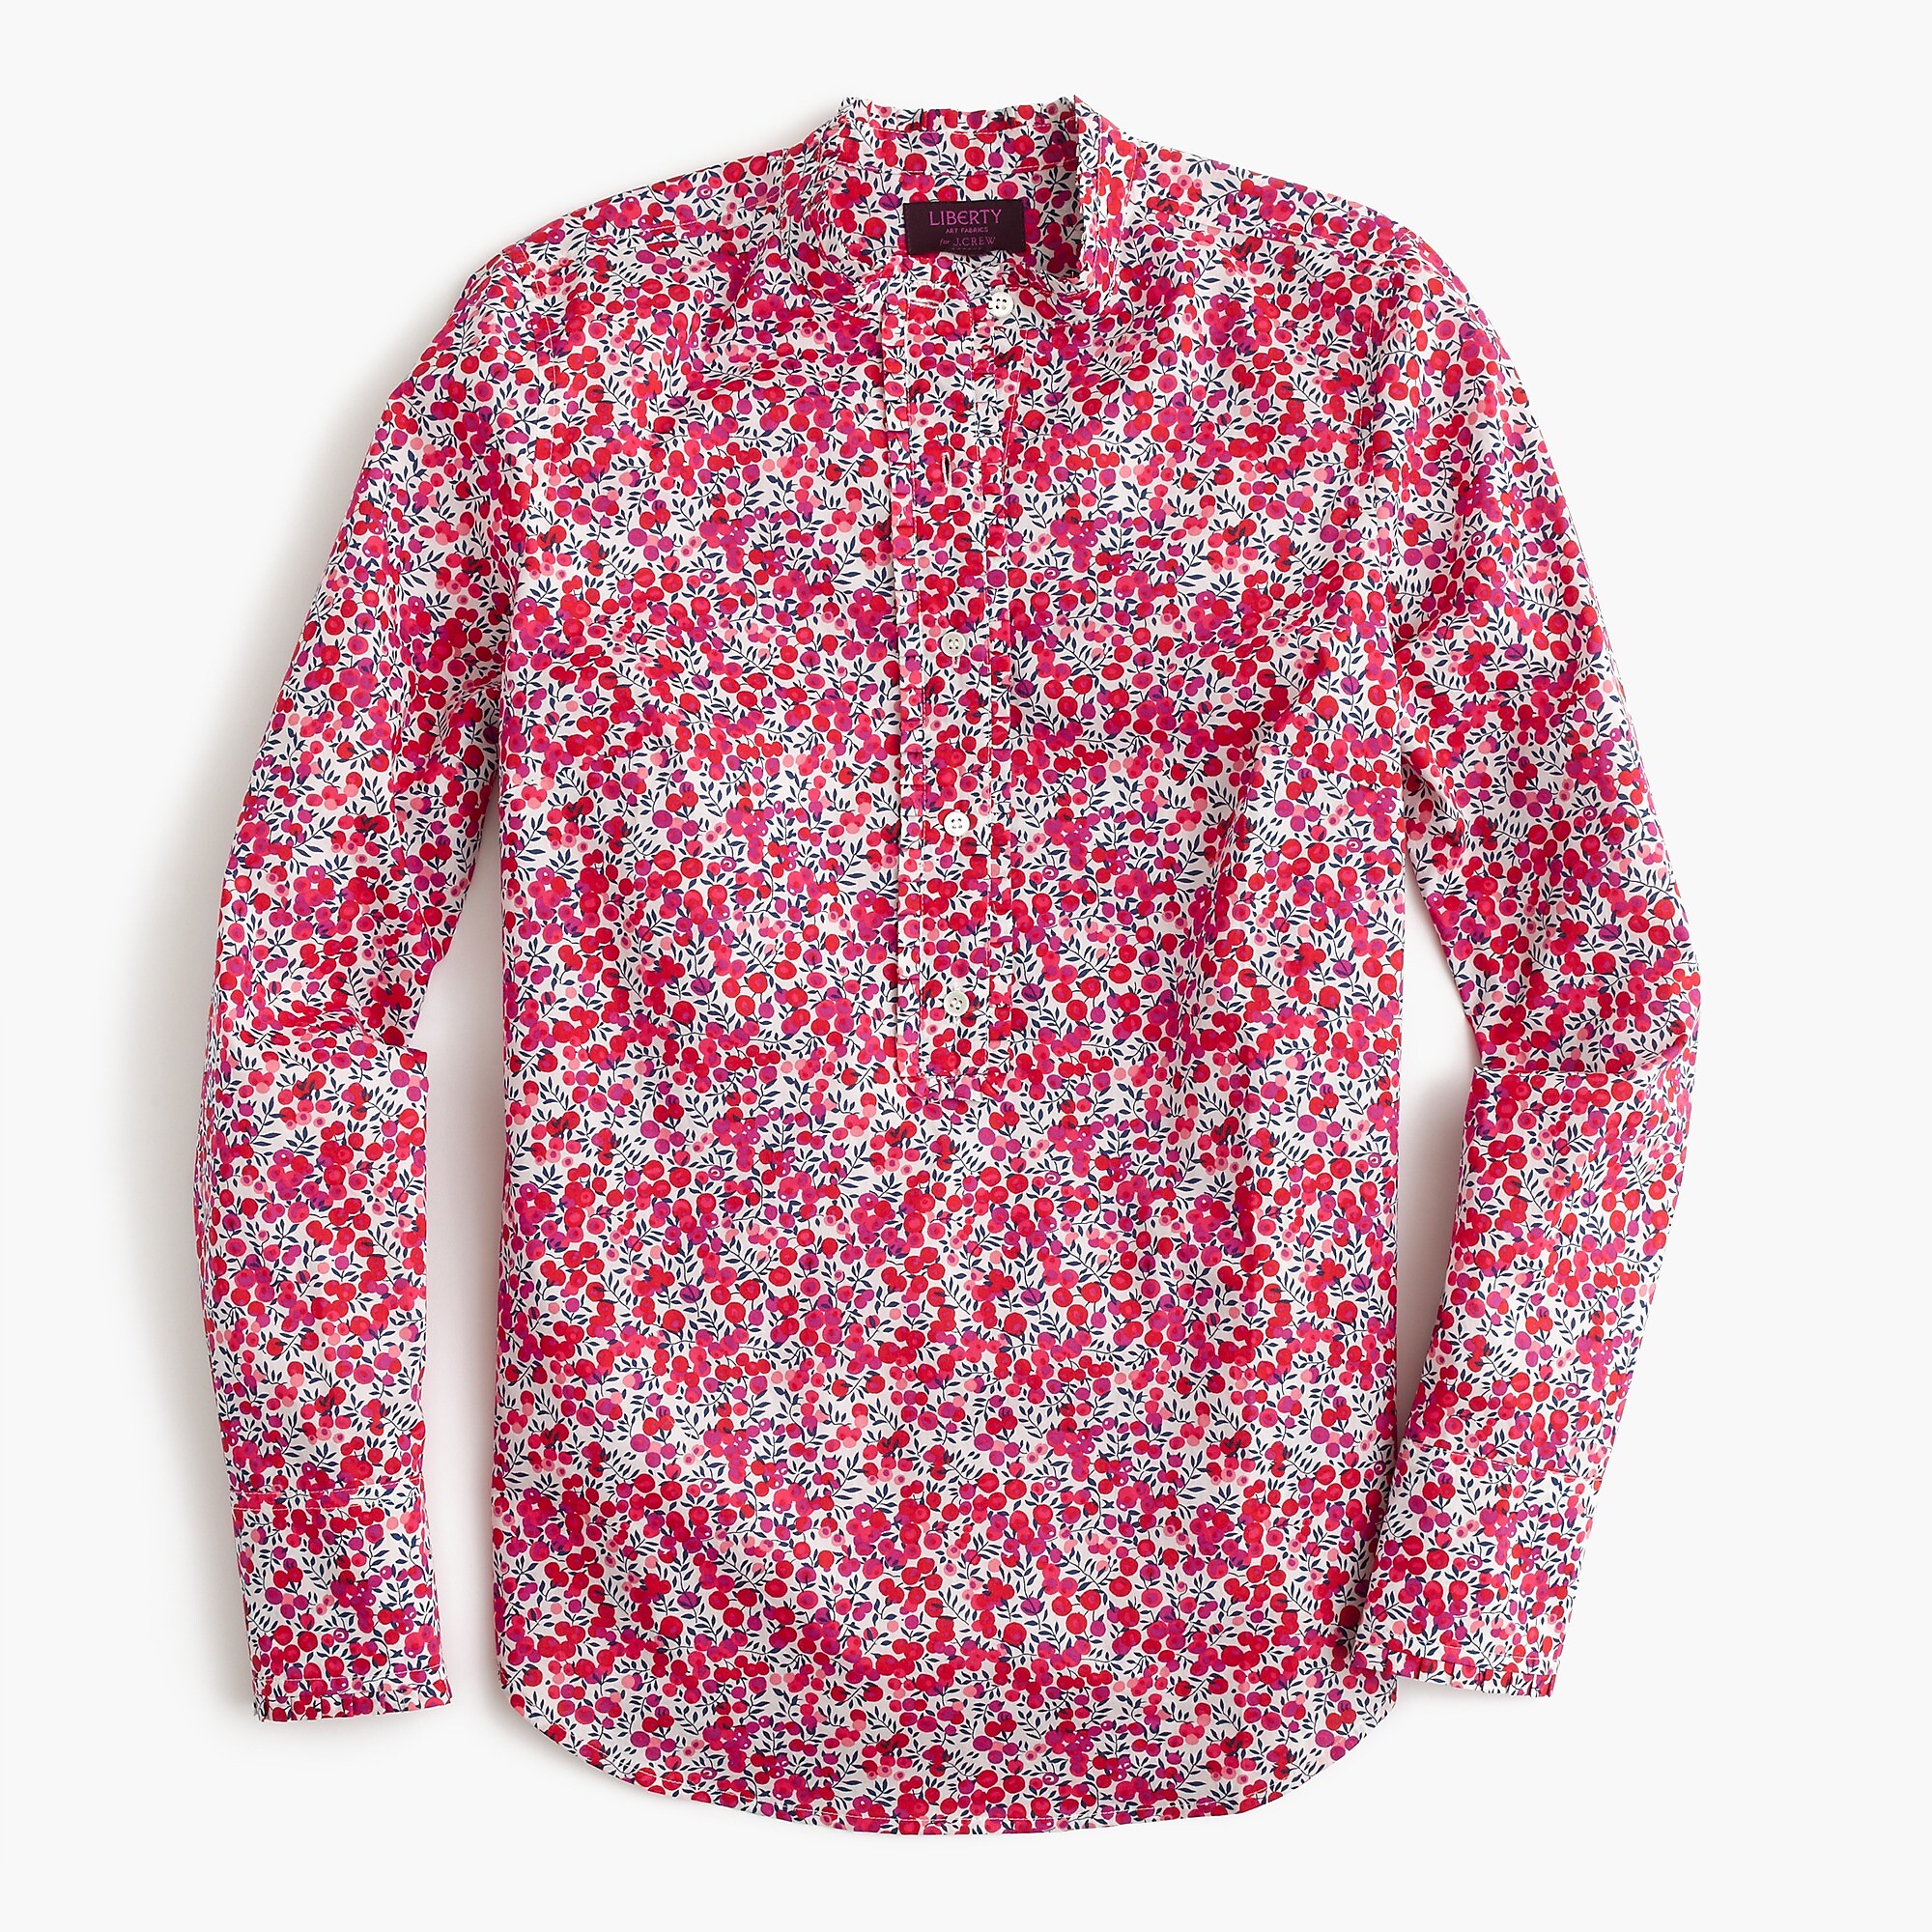 Shop J.Crew for the Ruffle popover shirt in Liberty Art Fabrics Wiltshire p...